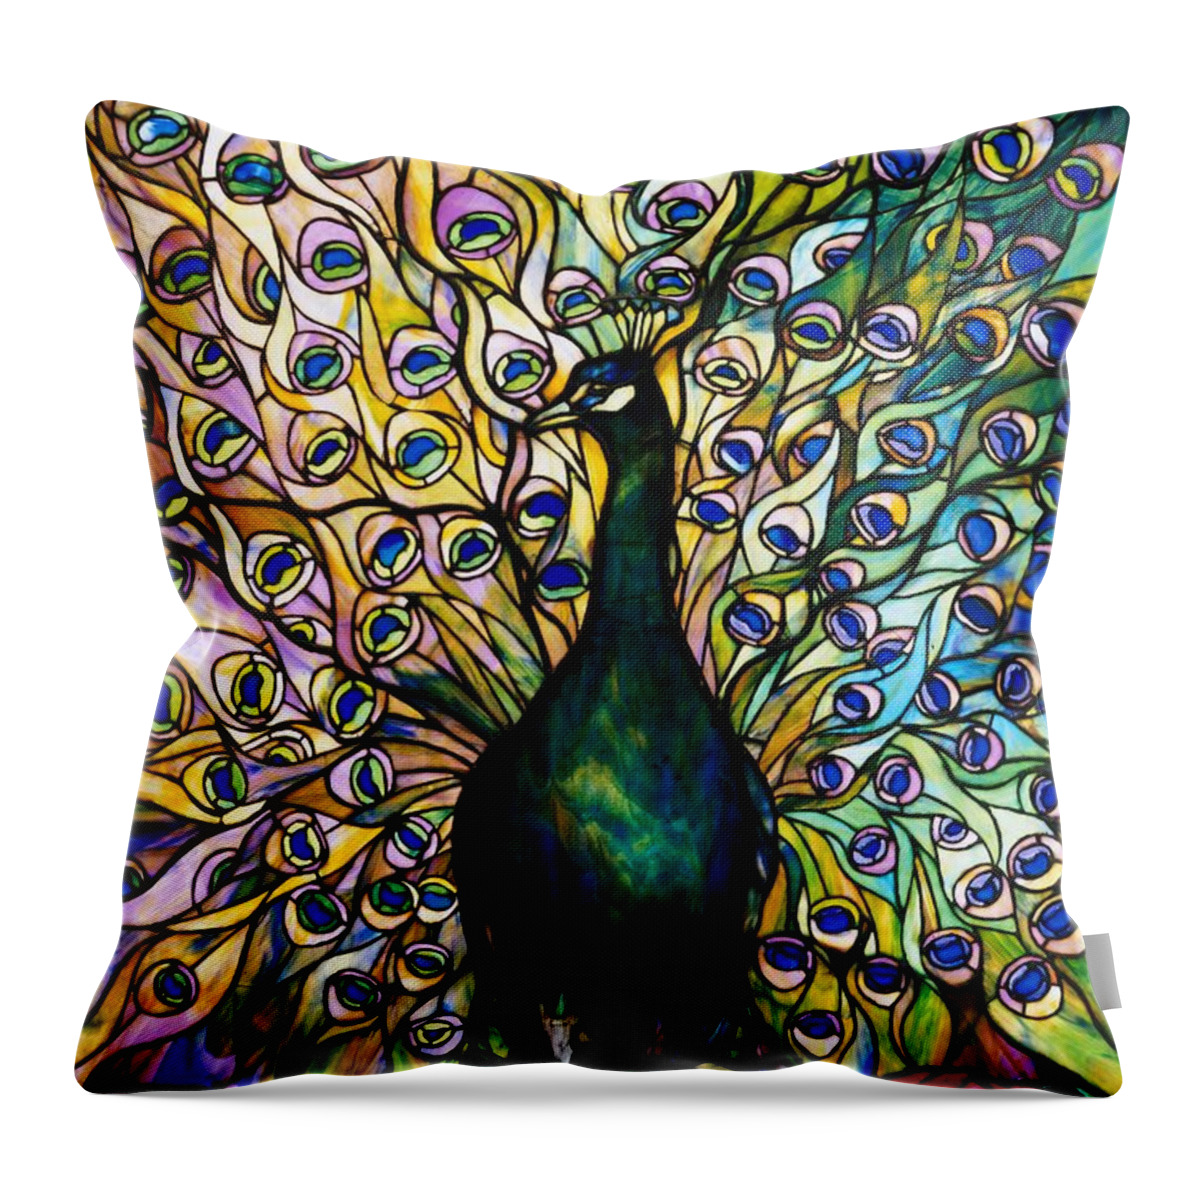 Peacock Throw Pillow featuring the photograph Peacock by American School